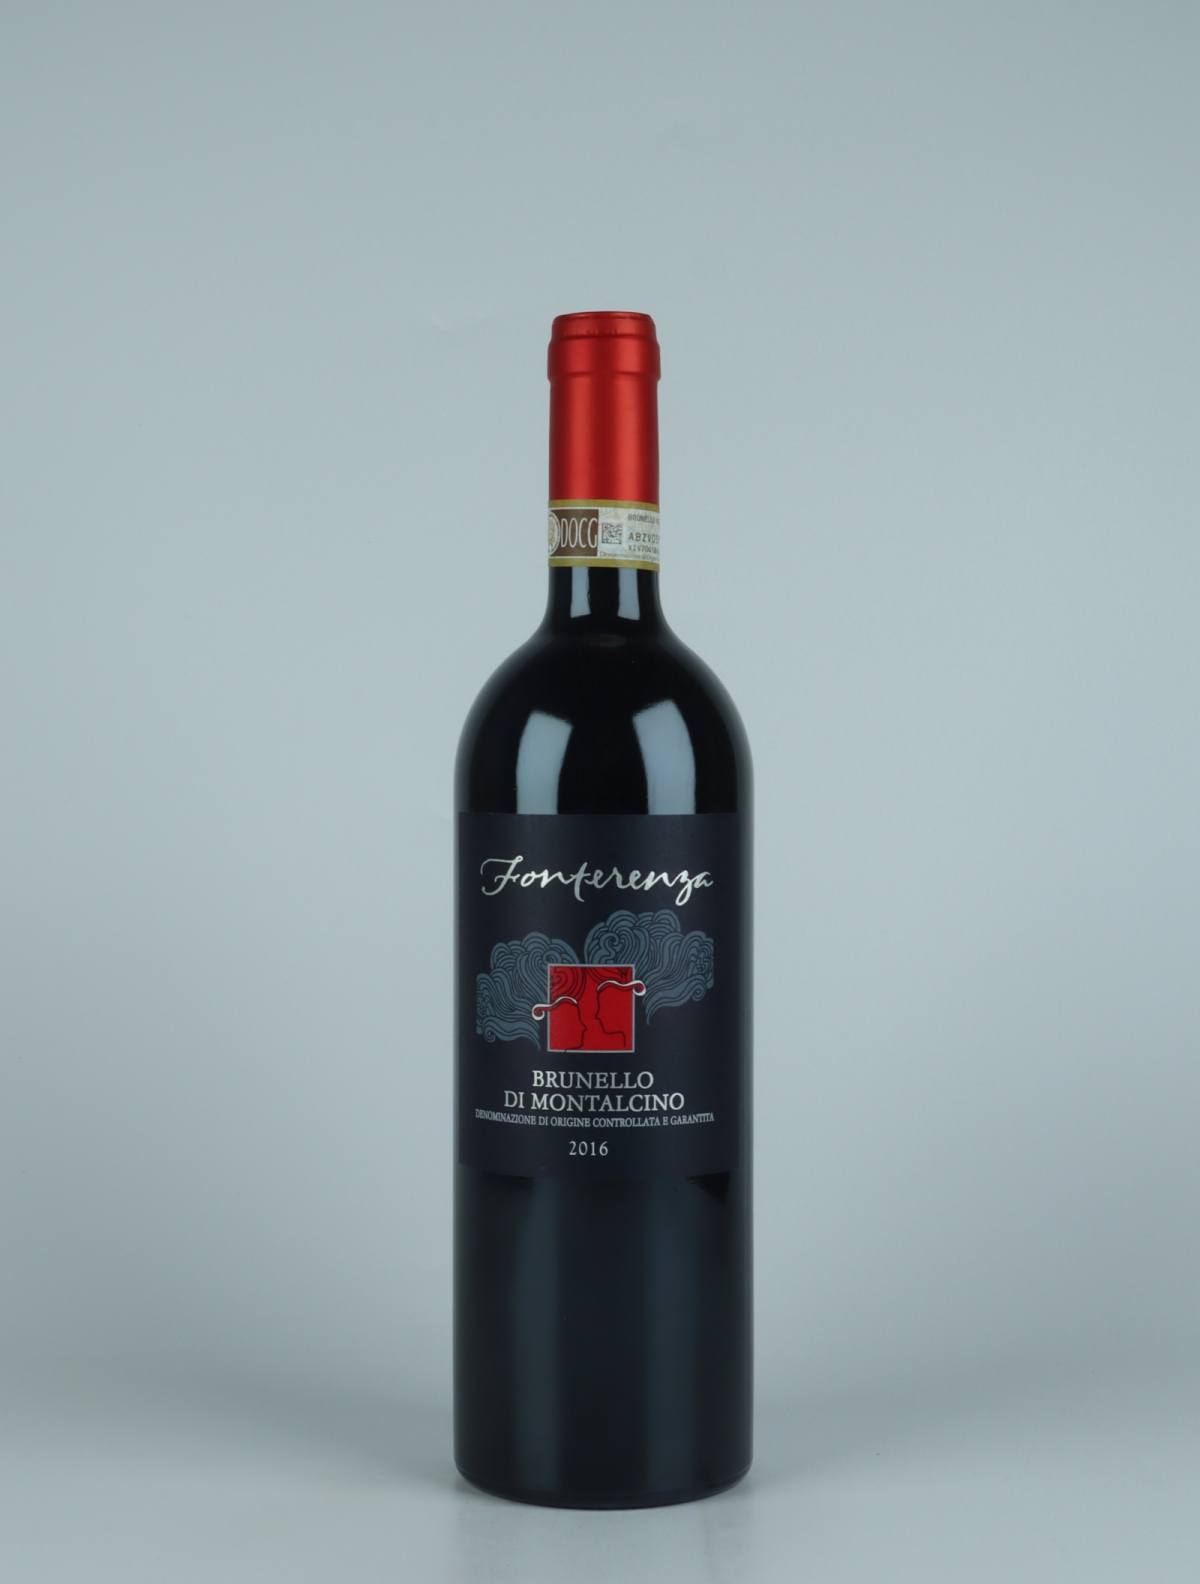 A bottle 2016 Brunello di Montalcino Red wine from Fonterenza, Tuscany in Italy